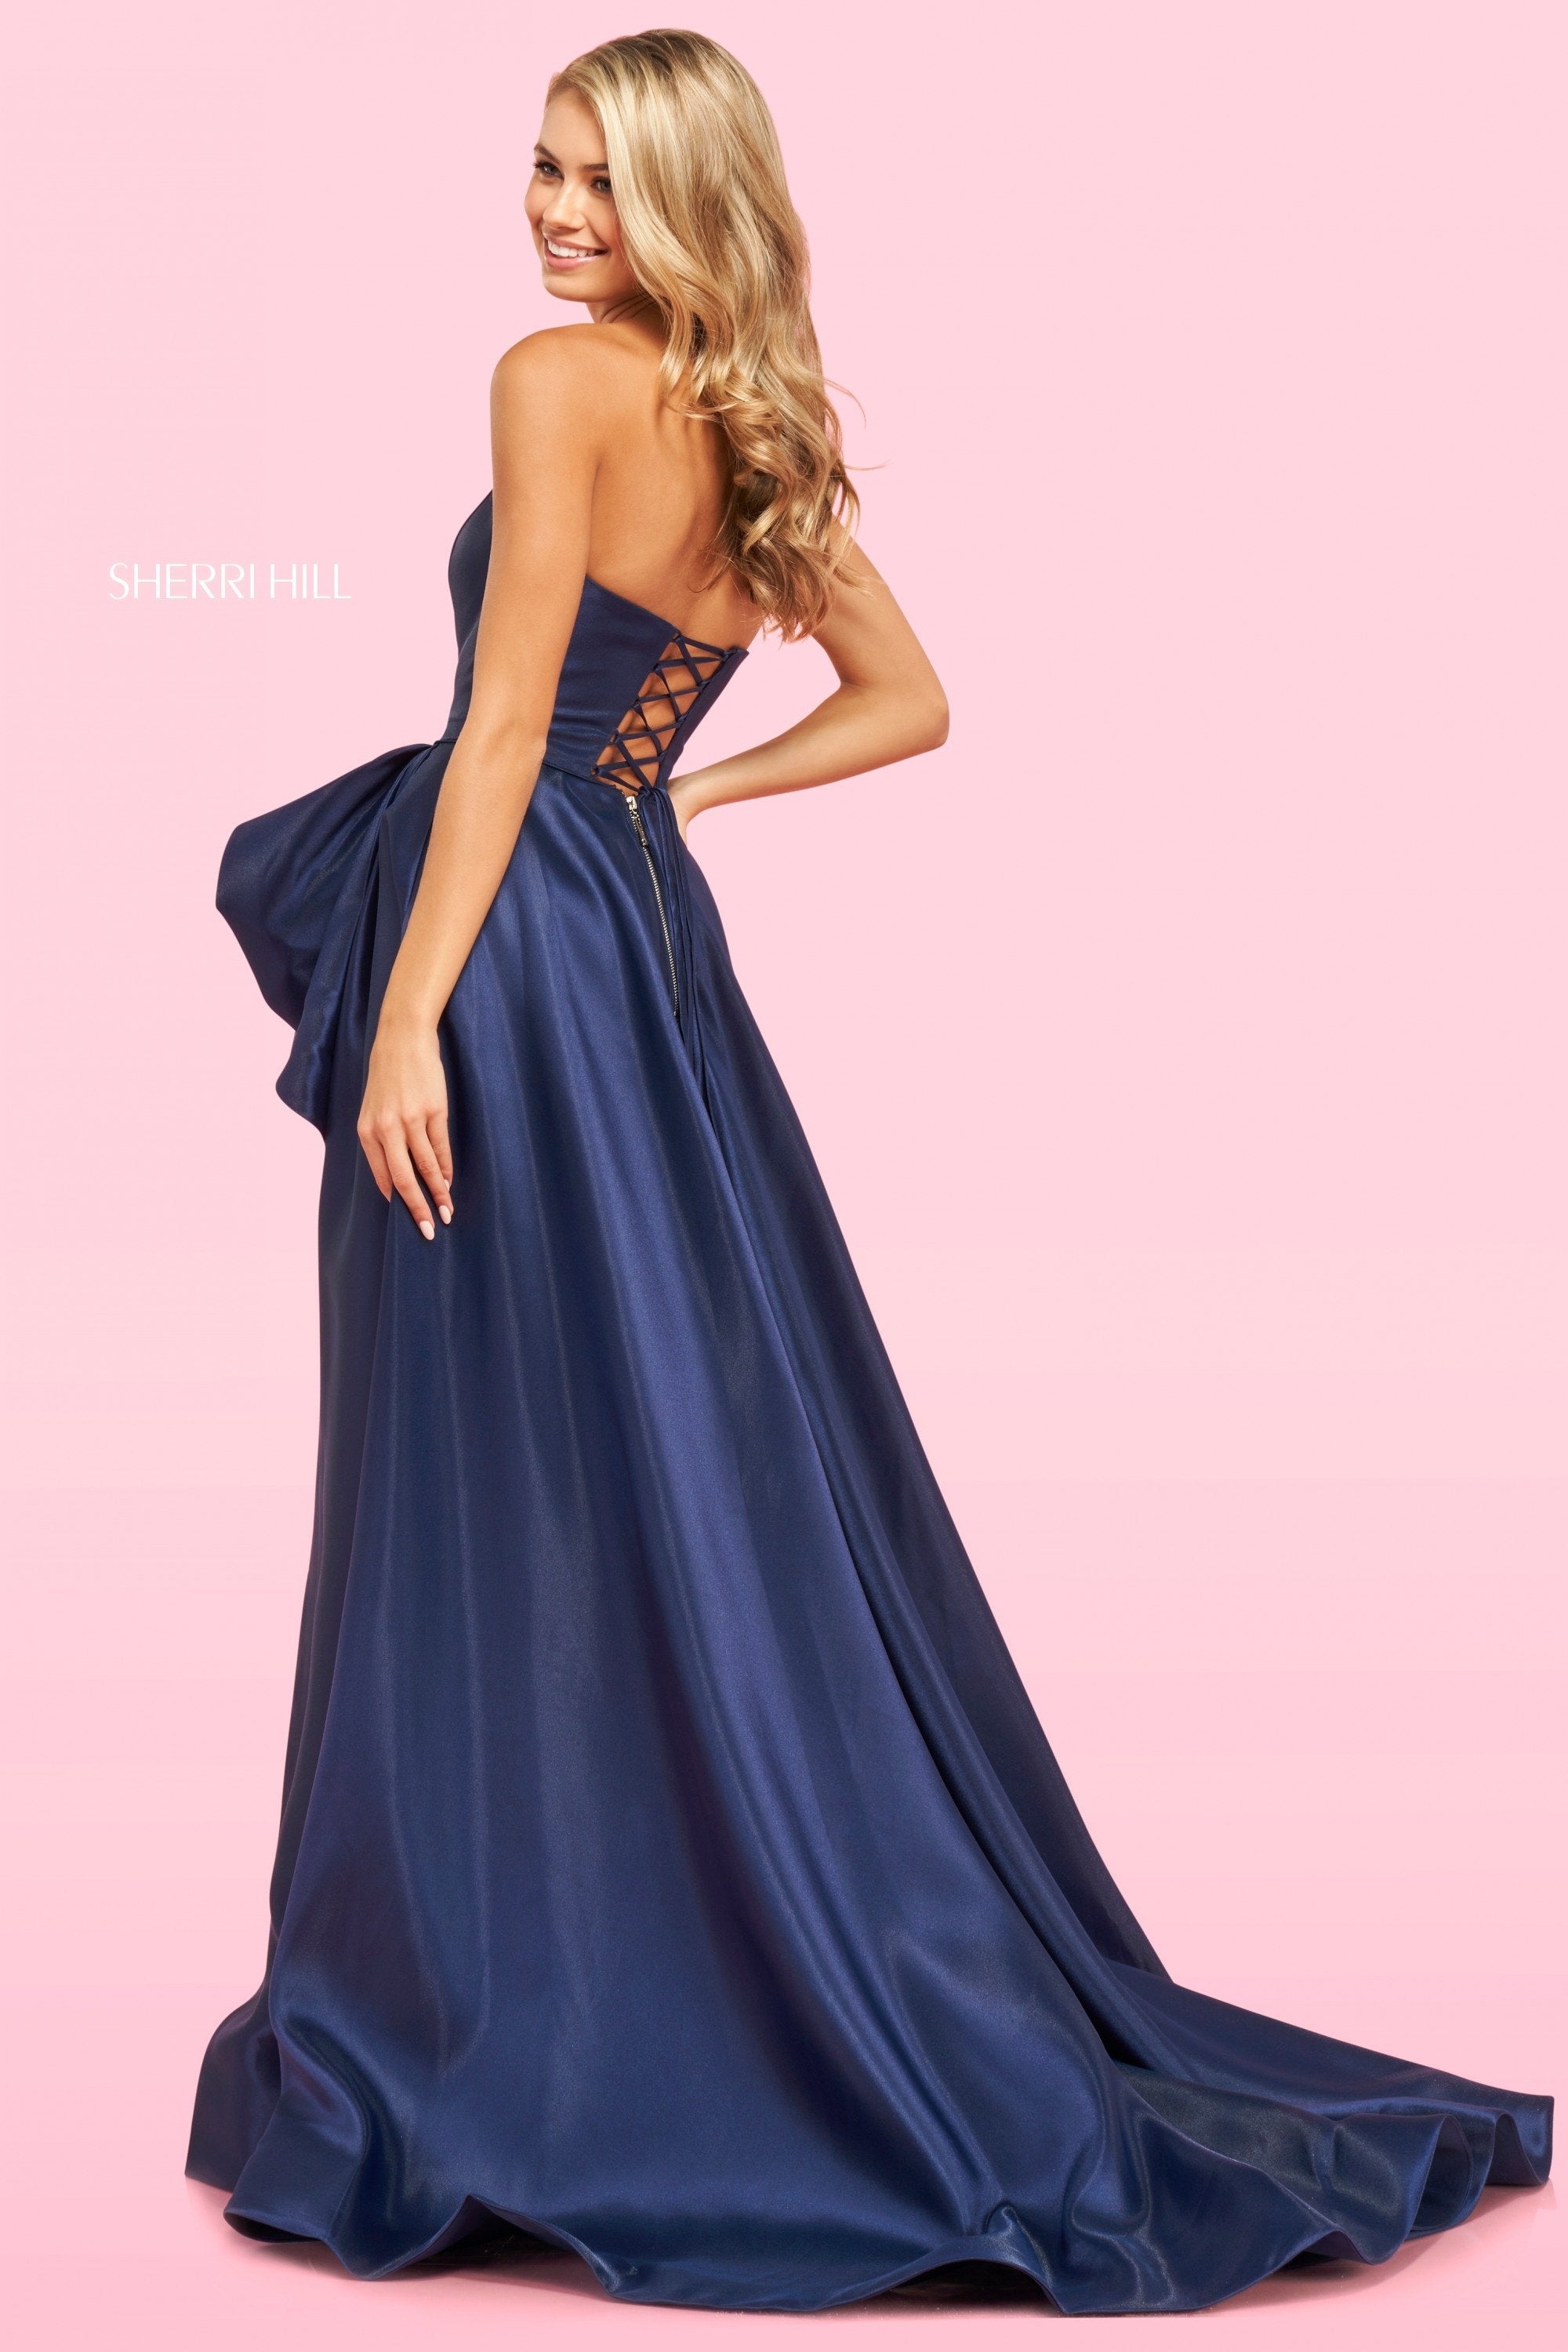 Sherri Hill 54258 dress images in these colors: Navy, Red, Pink, Royal, Light Blue.